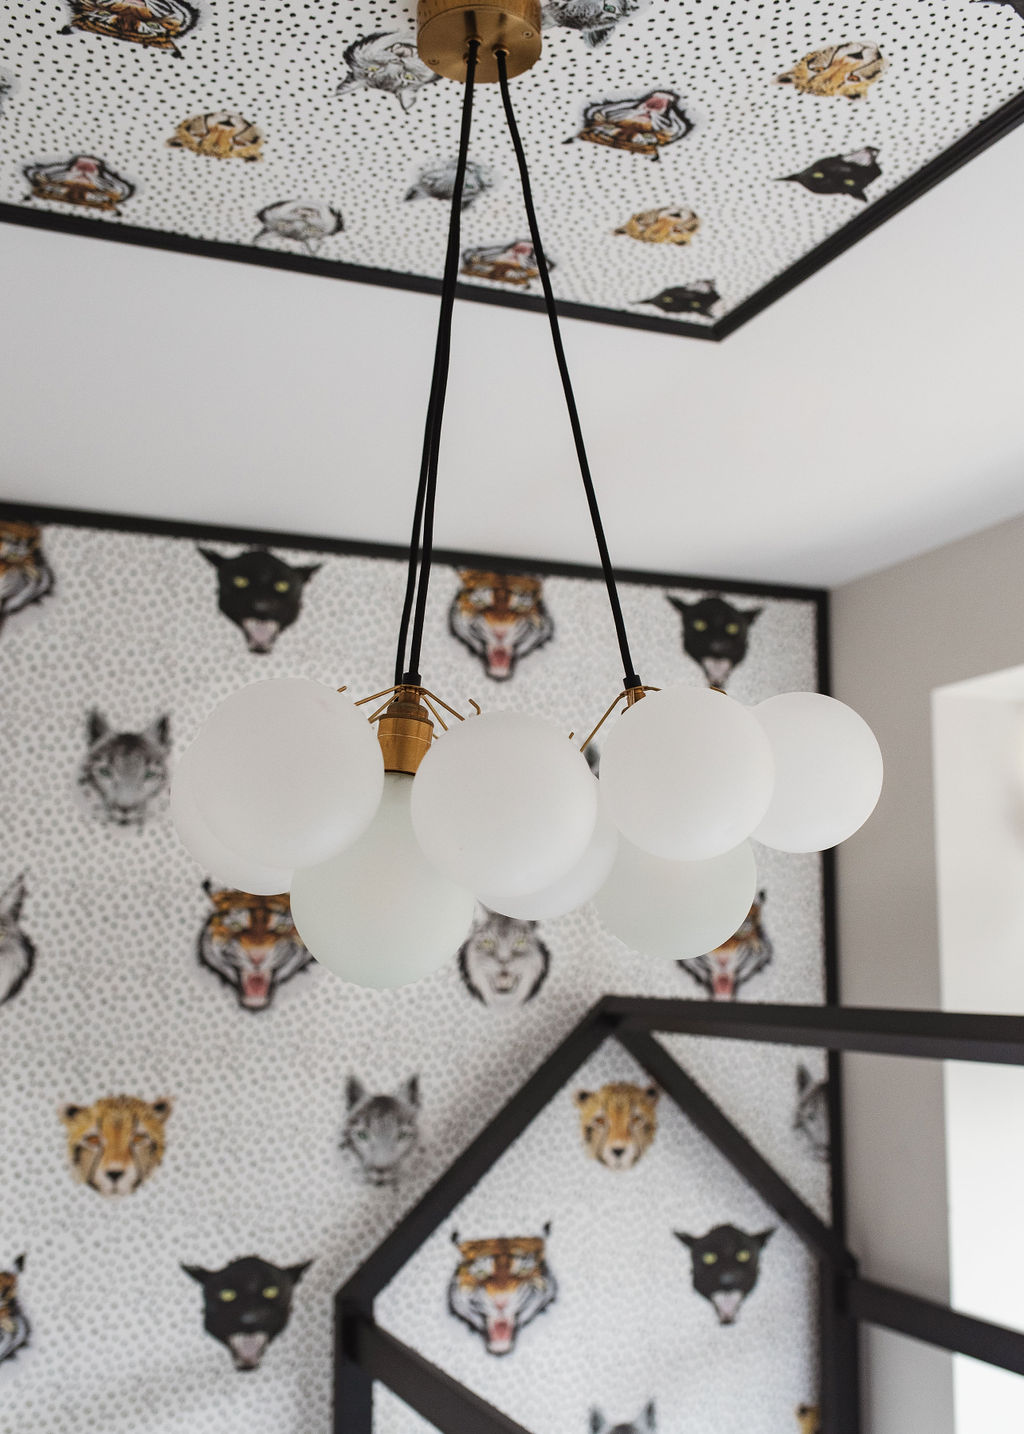 close up of the interior decoration in a childs bedroom focussed on the light feature